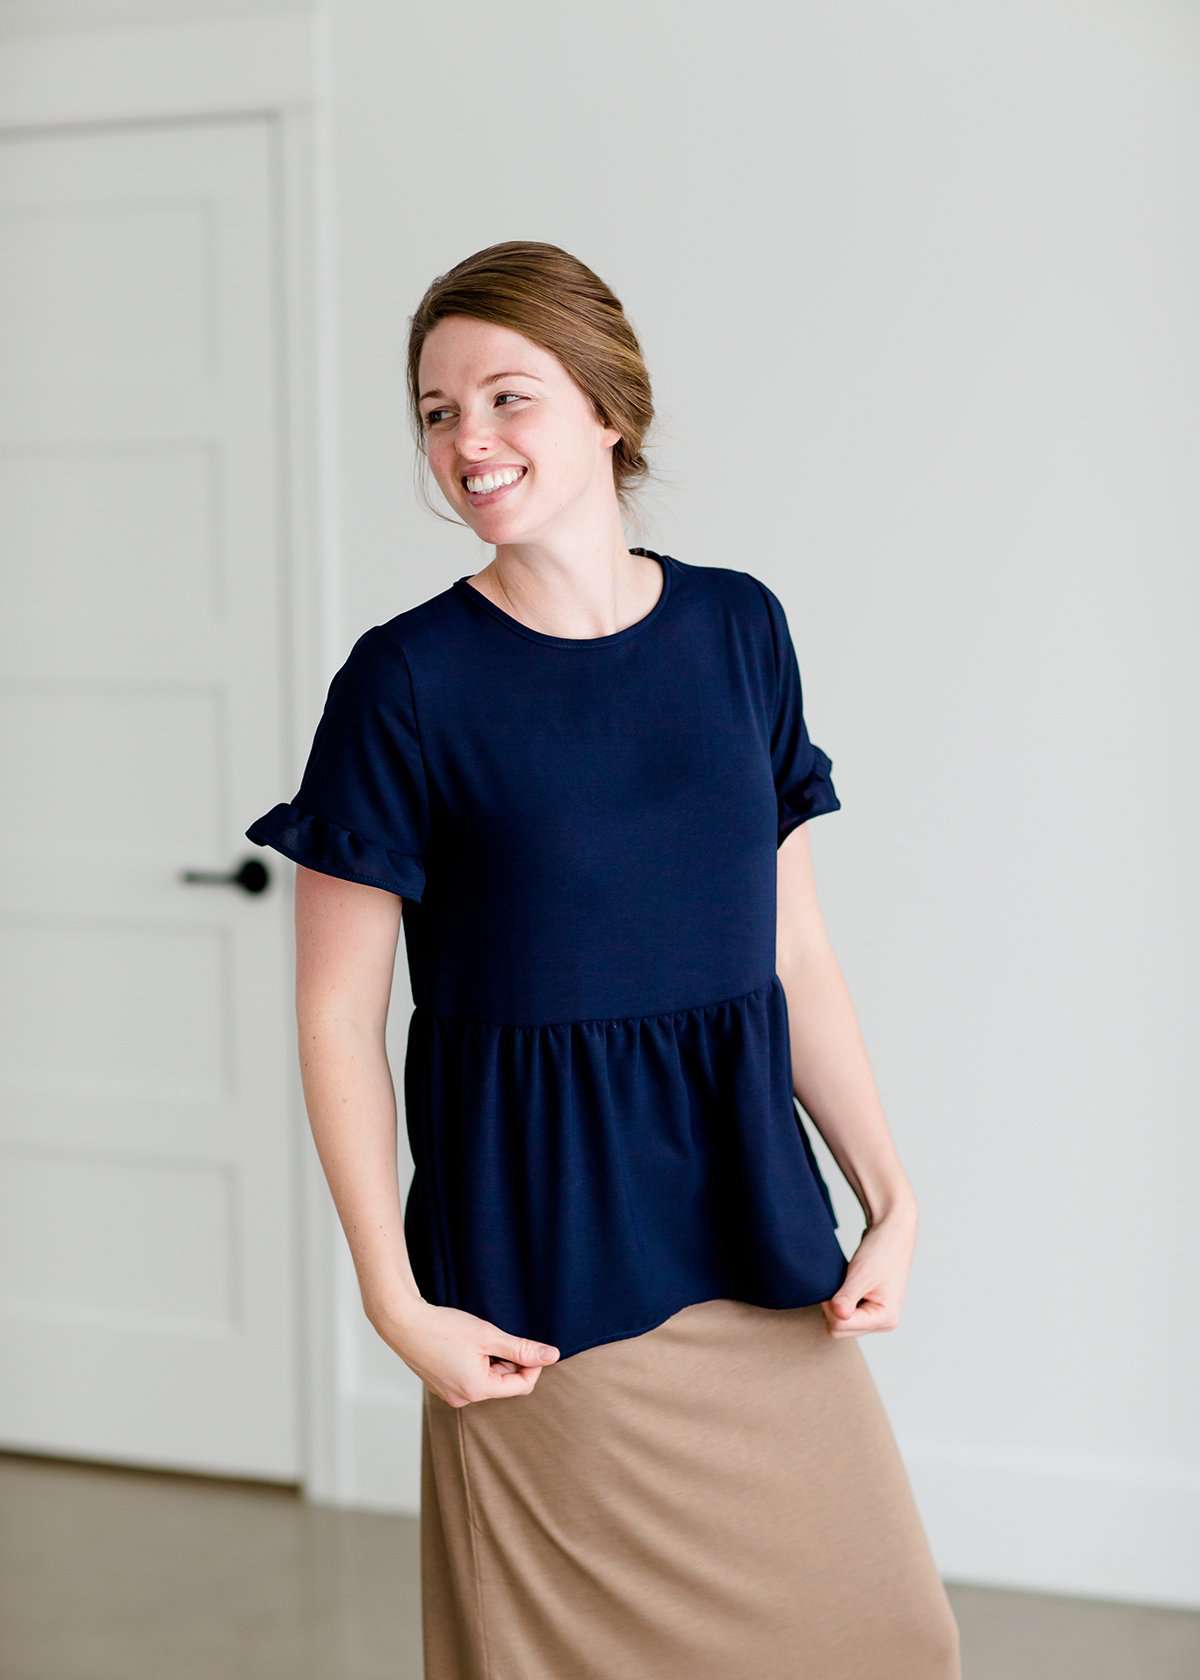 Woman wearing a navy peplum baby doll top that has ruffle details on the sleeves.